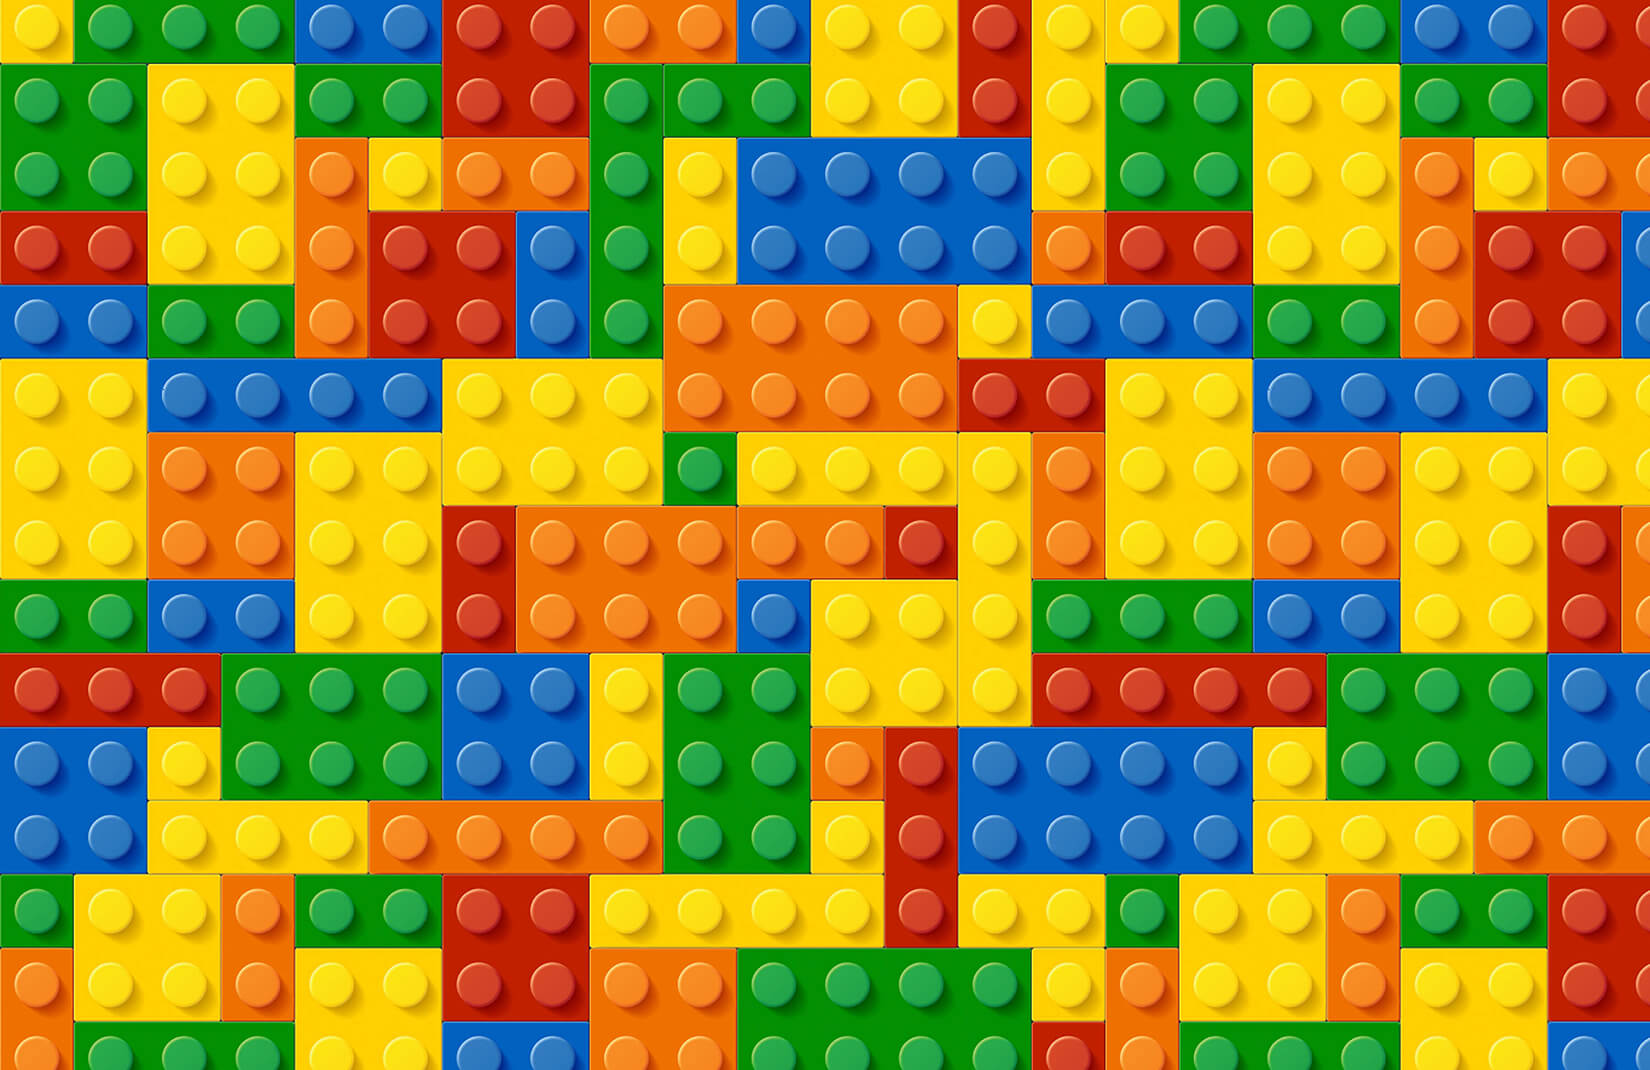 lego bedroom wallpaper,pattern,yellow,colorfulness,symmetry,design